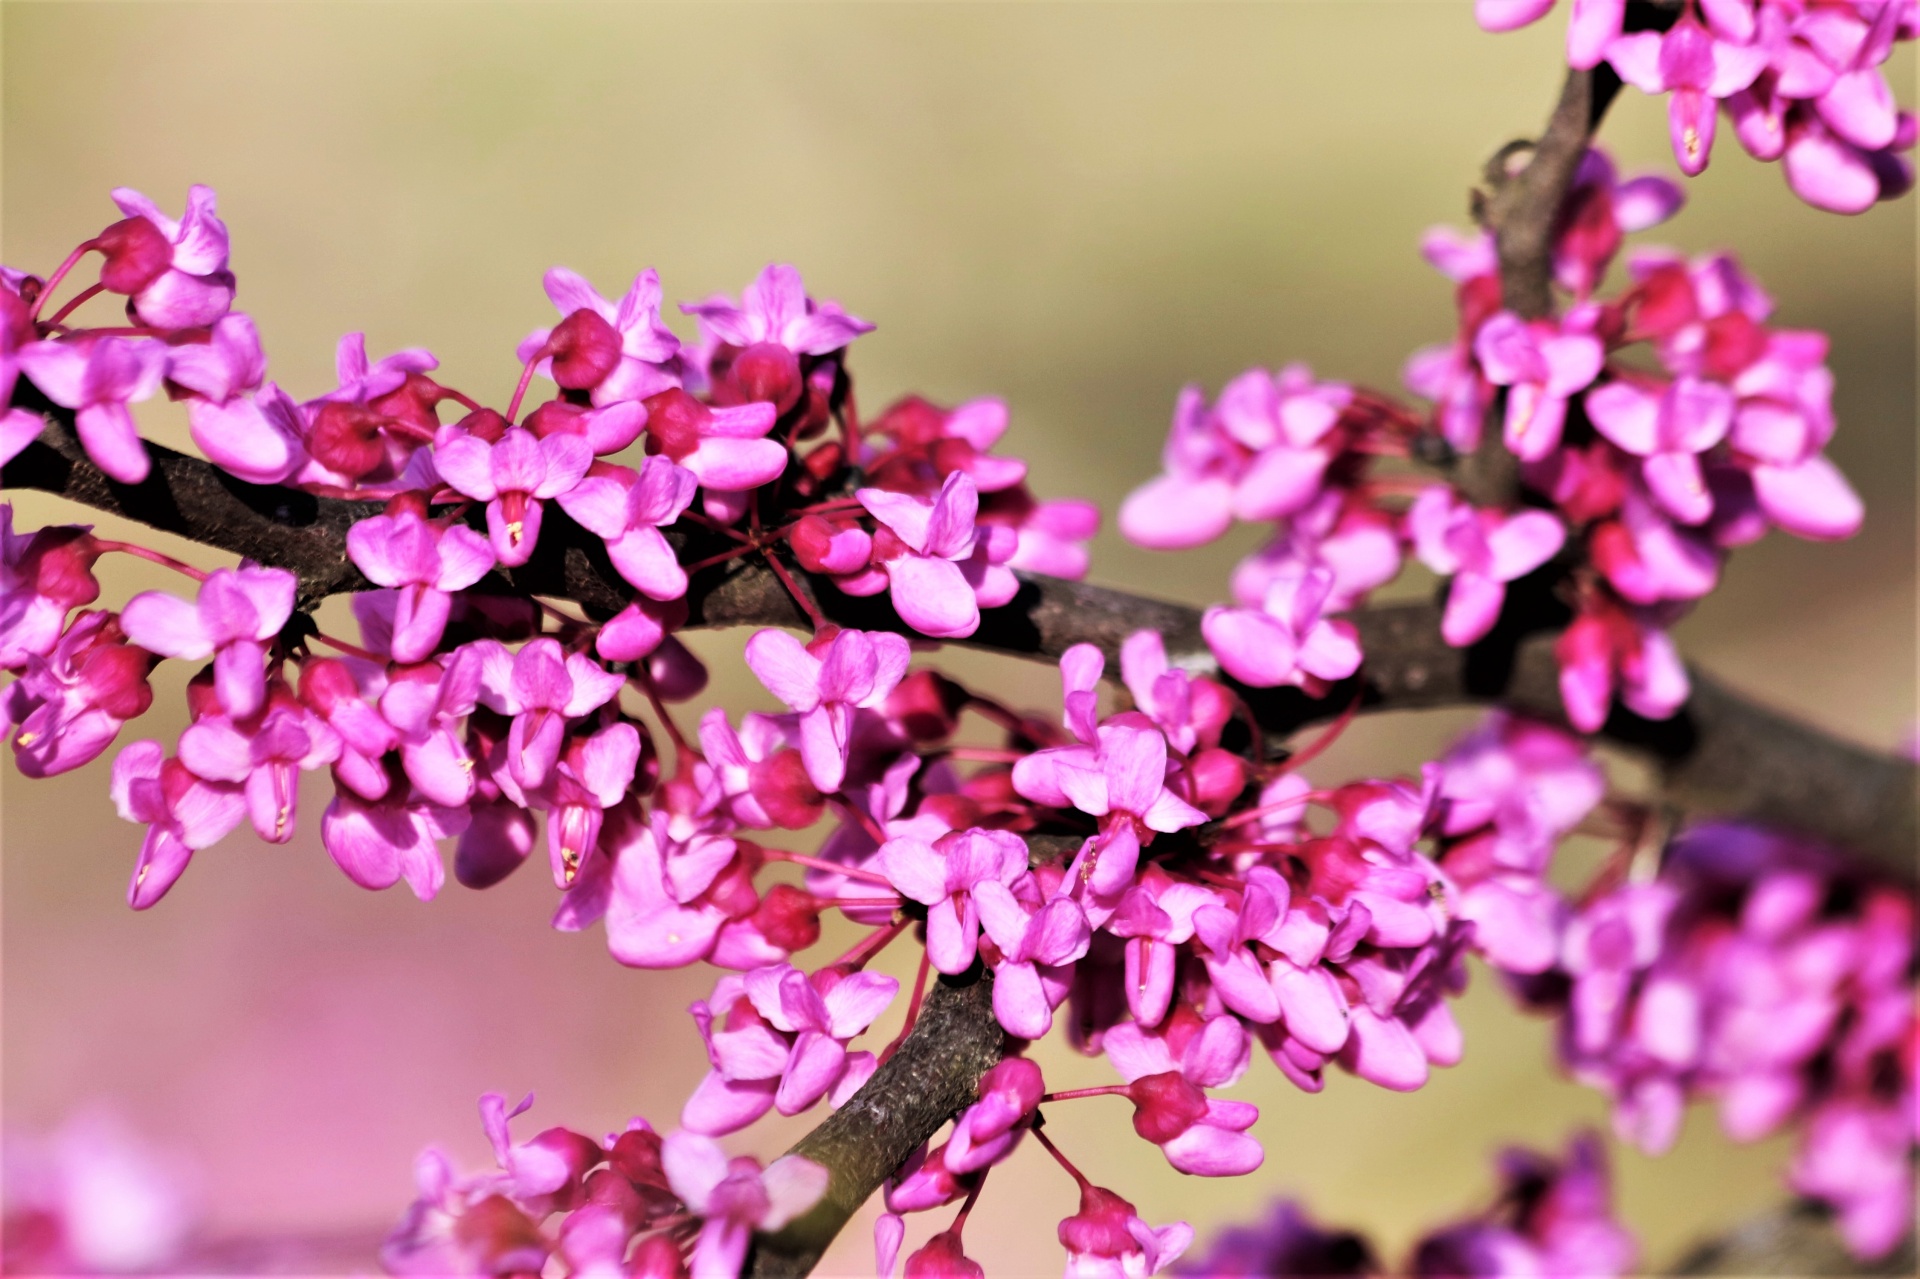 Close-up of pink redbud tree flower blossoms.